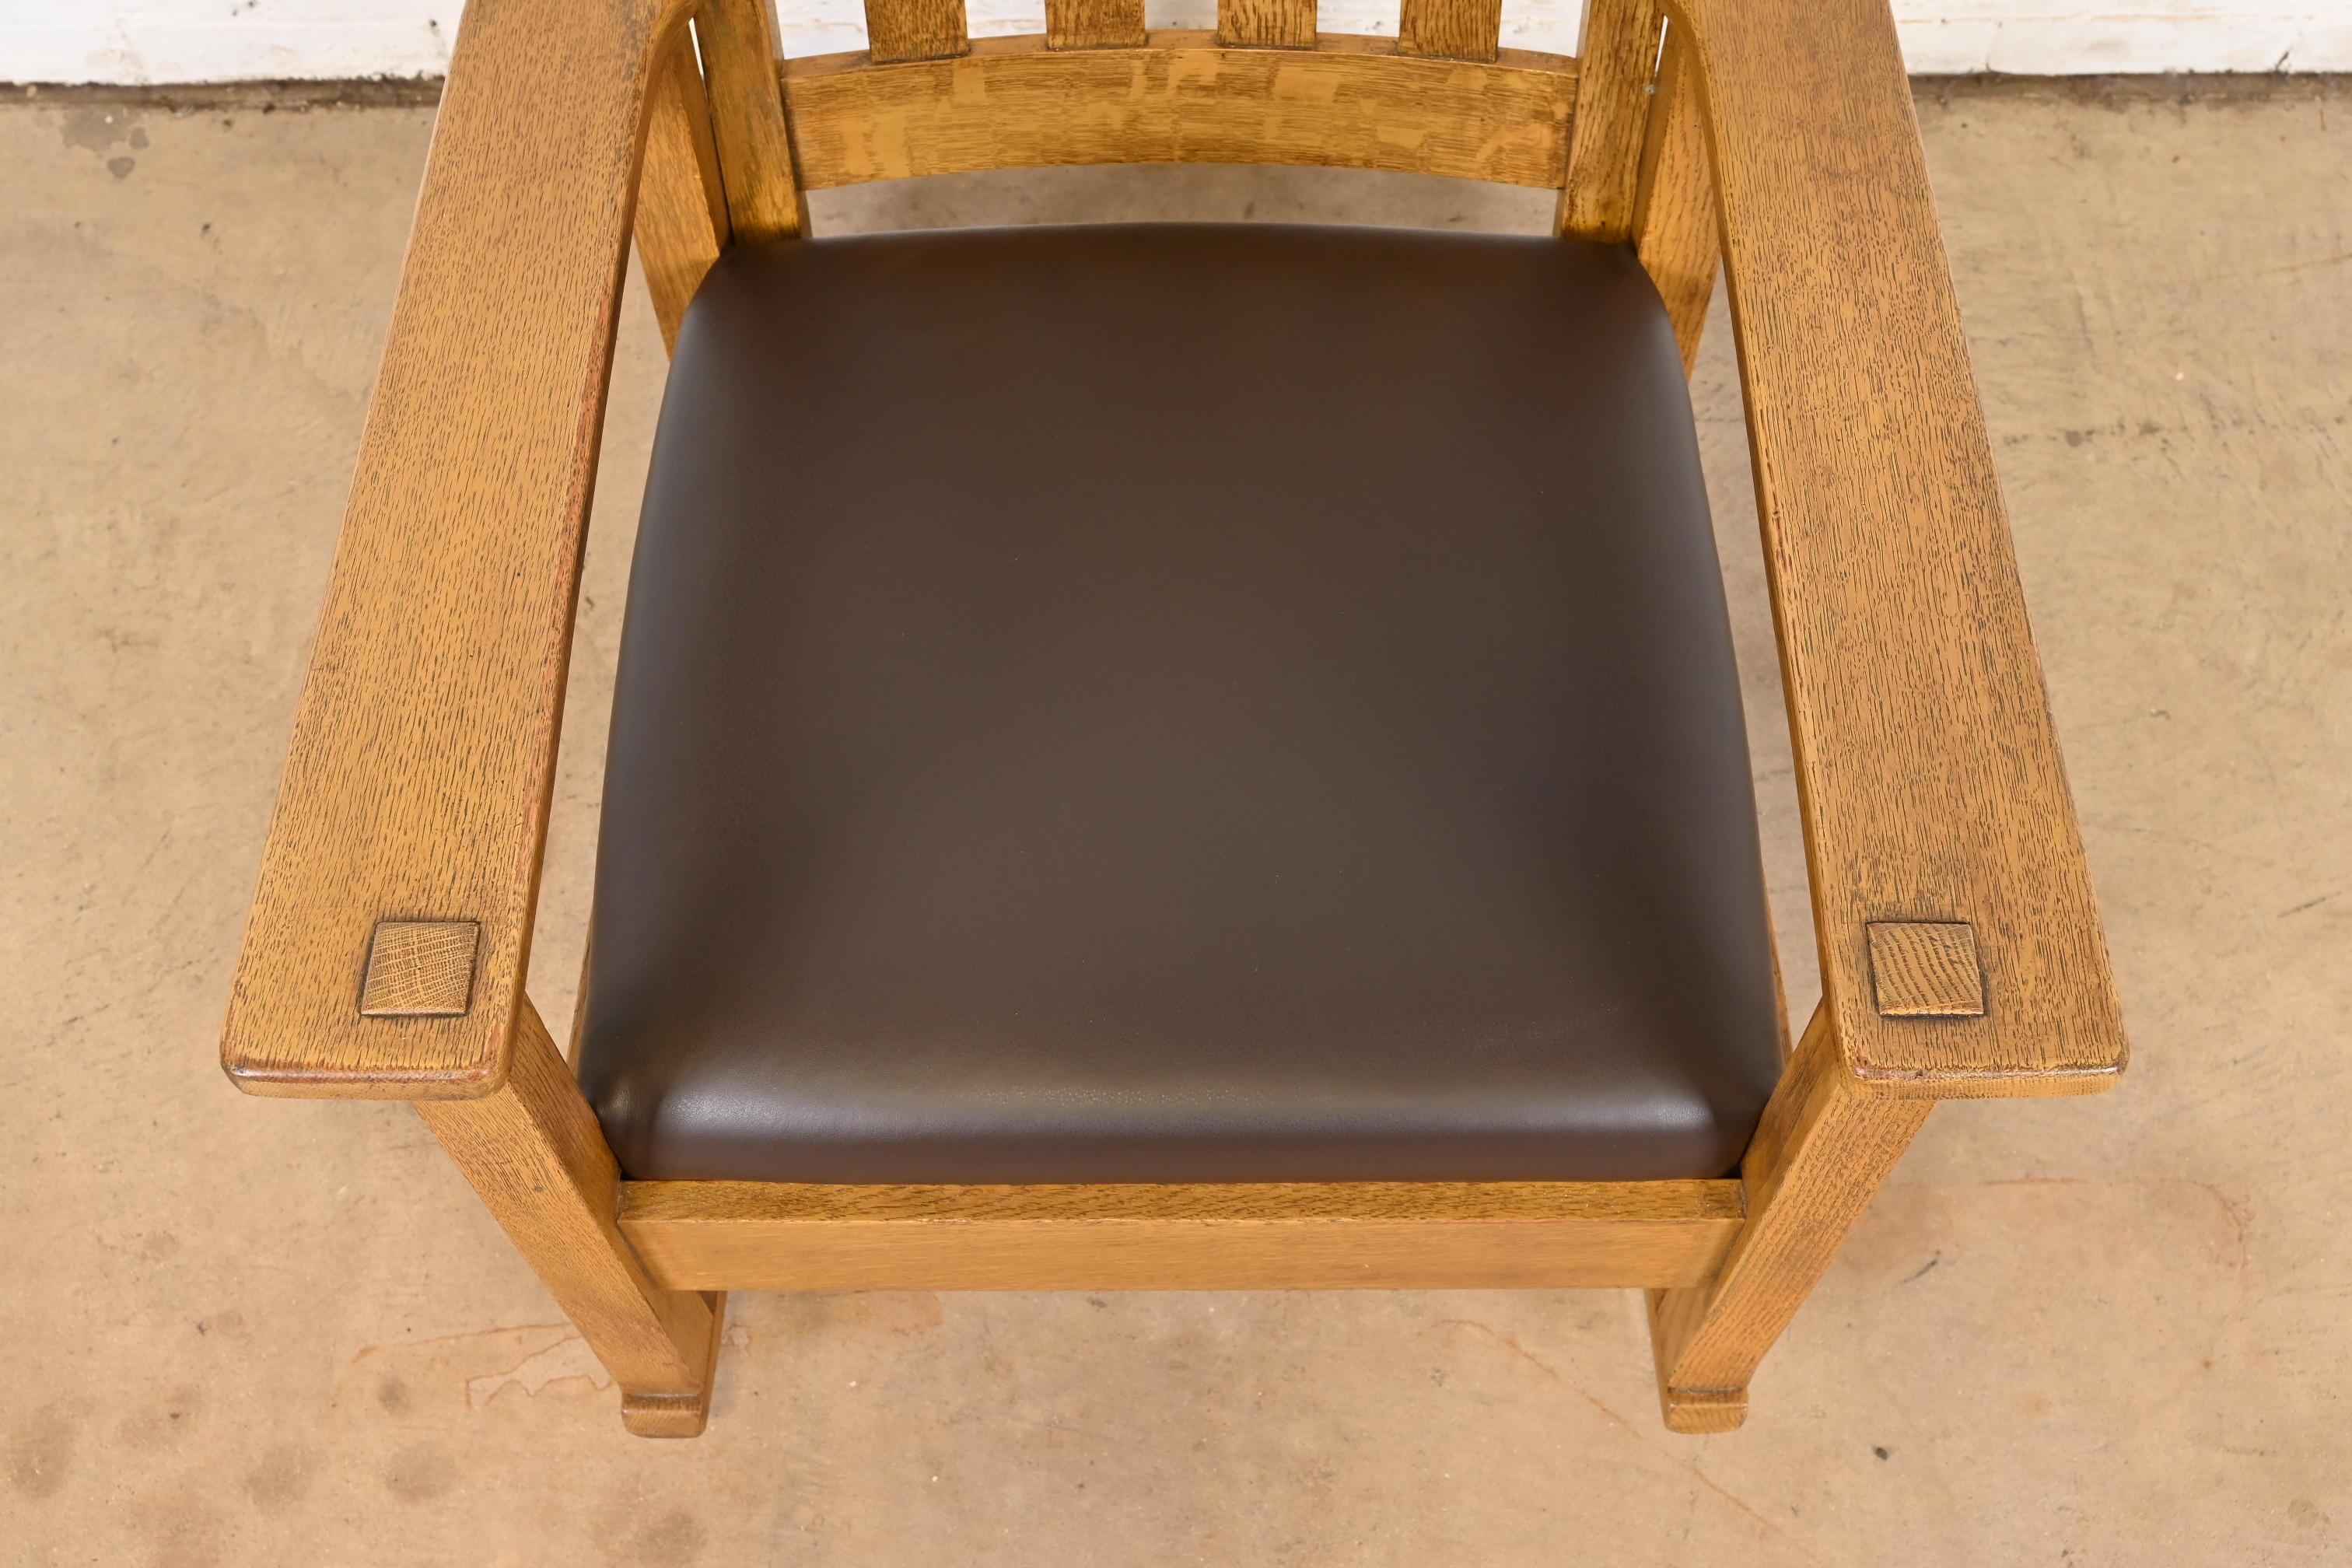 20th Century Stickley Brothers Arts & Crafts Oak and Leather Rocking Chair, Circa 1900